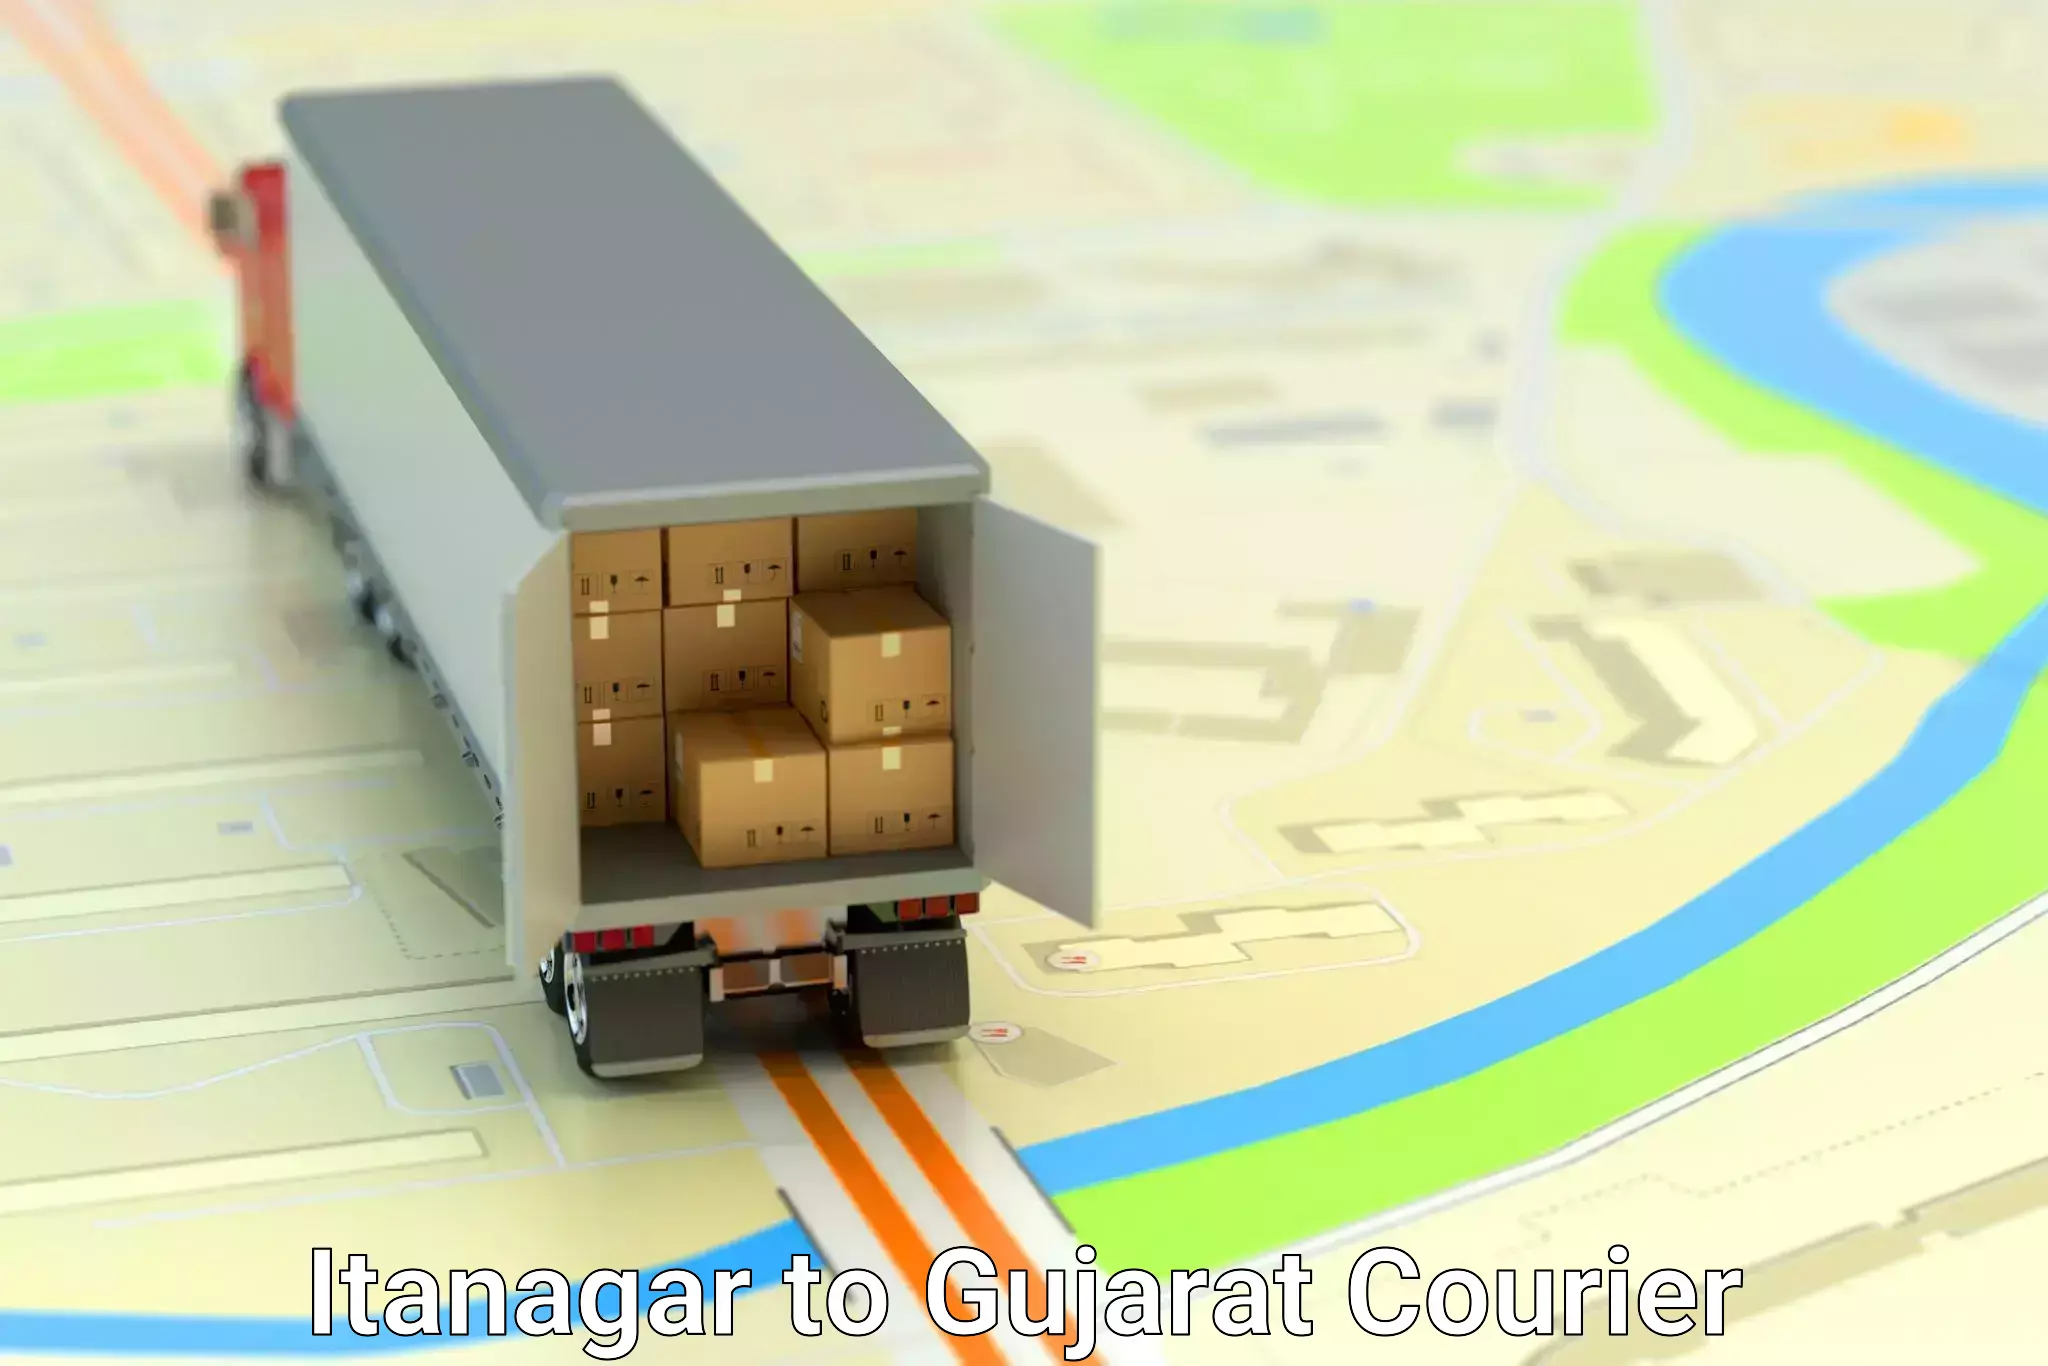 State-of-the-art courier technology Itanagar to Porbandar